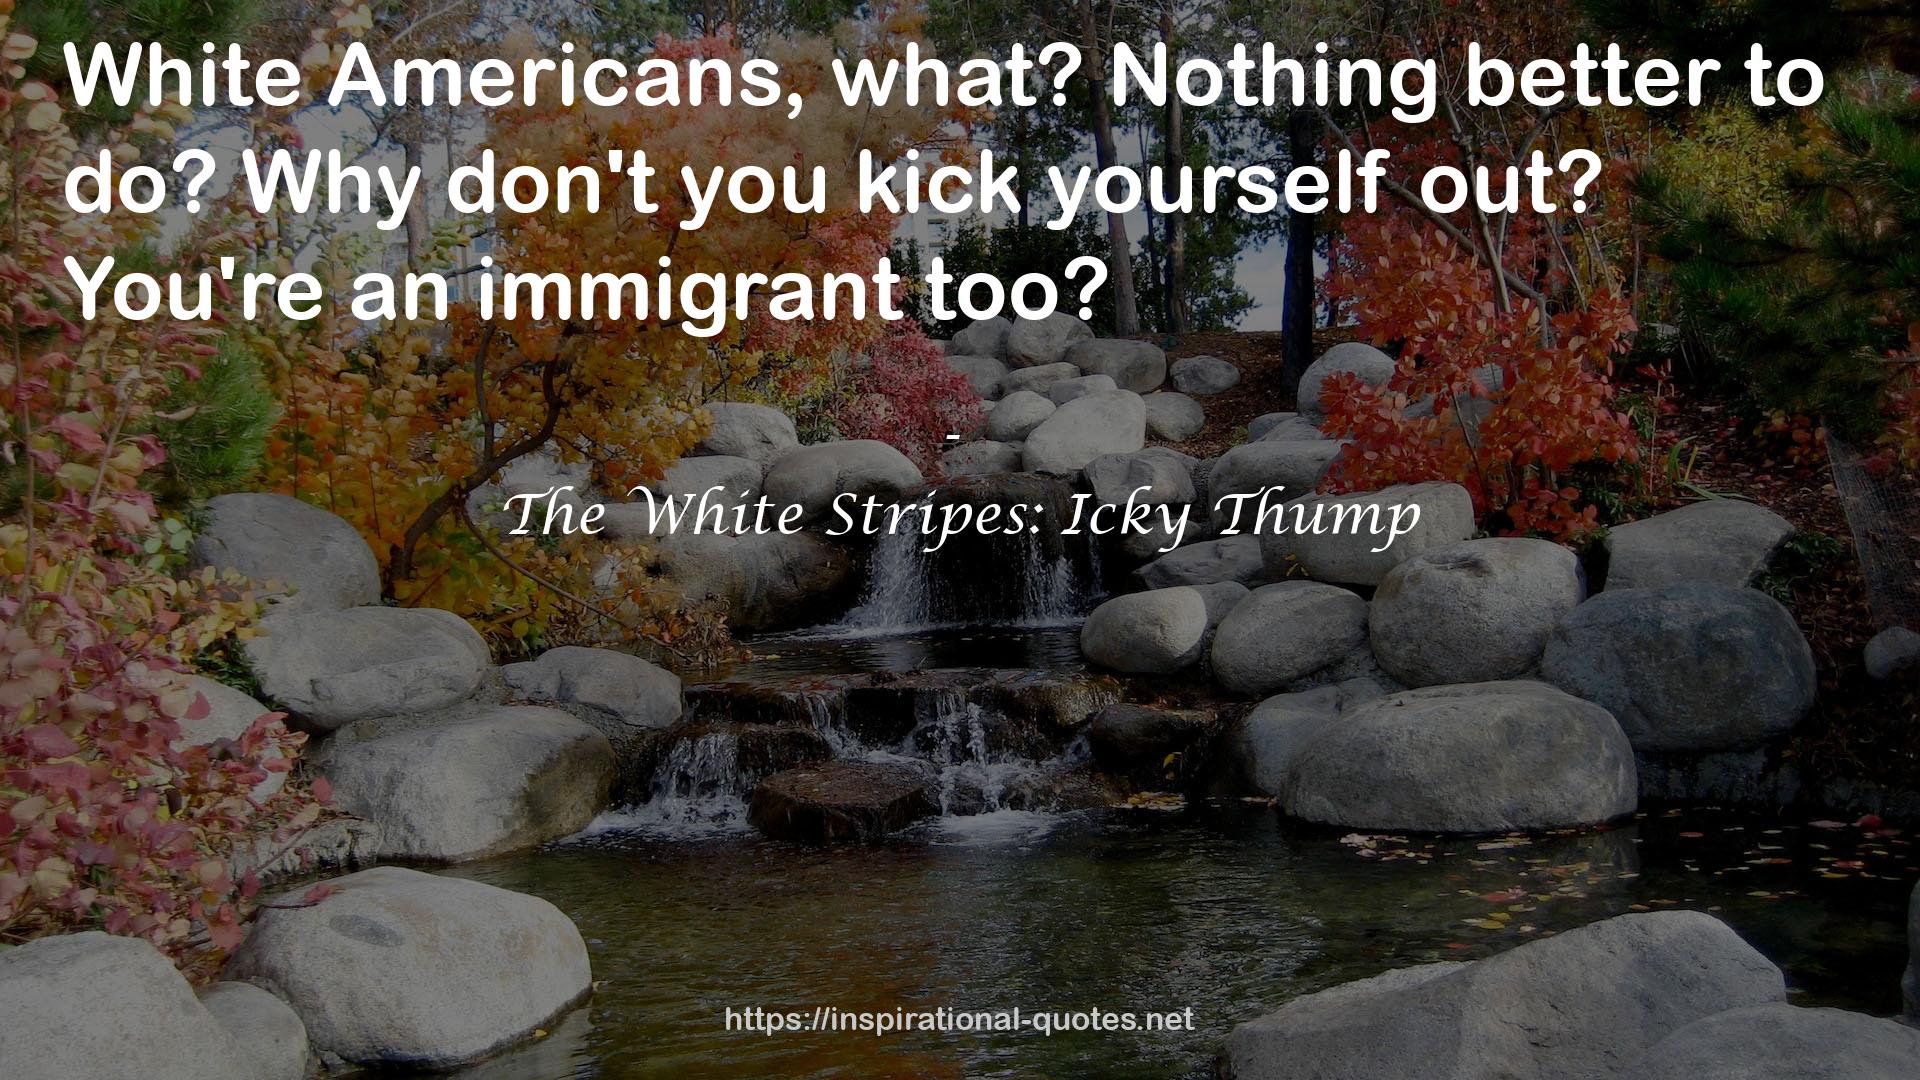 The White Stripes: Icky Thump QUOTES